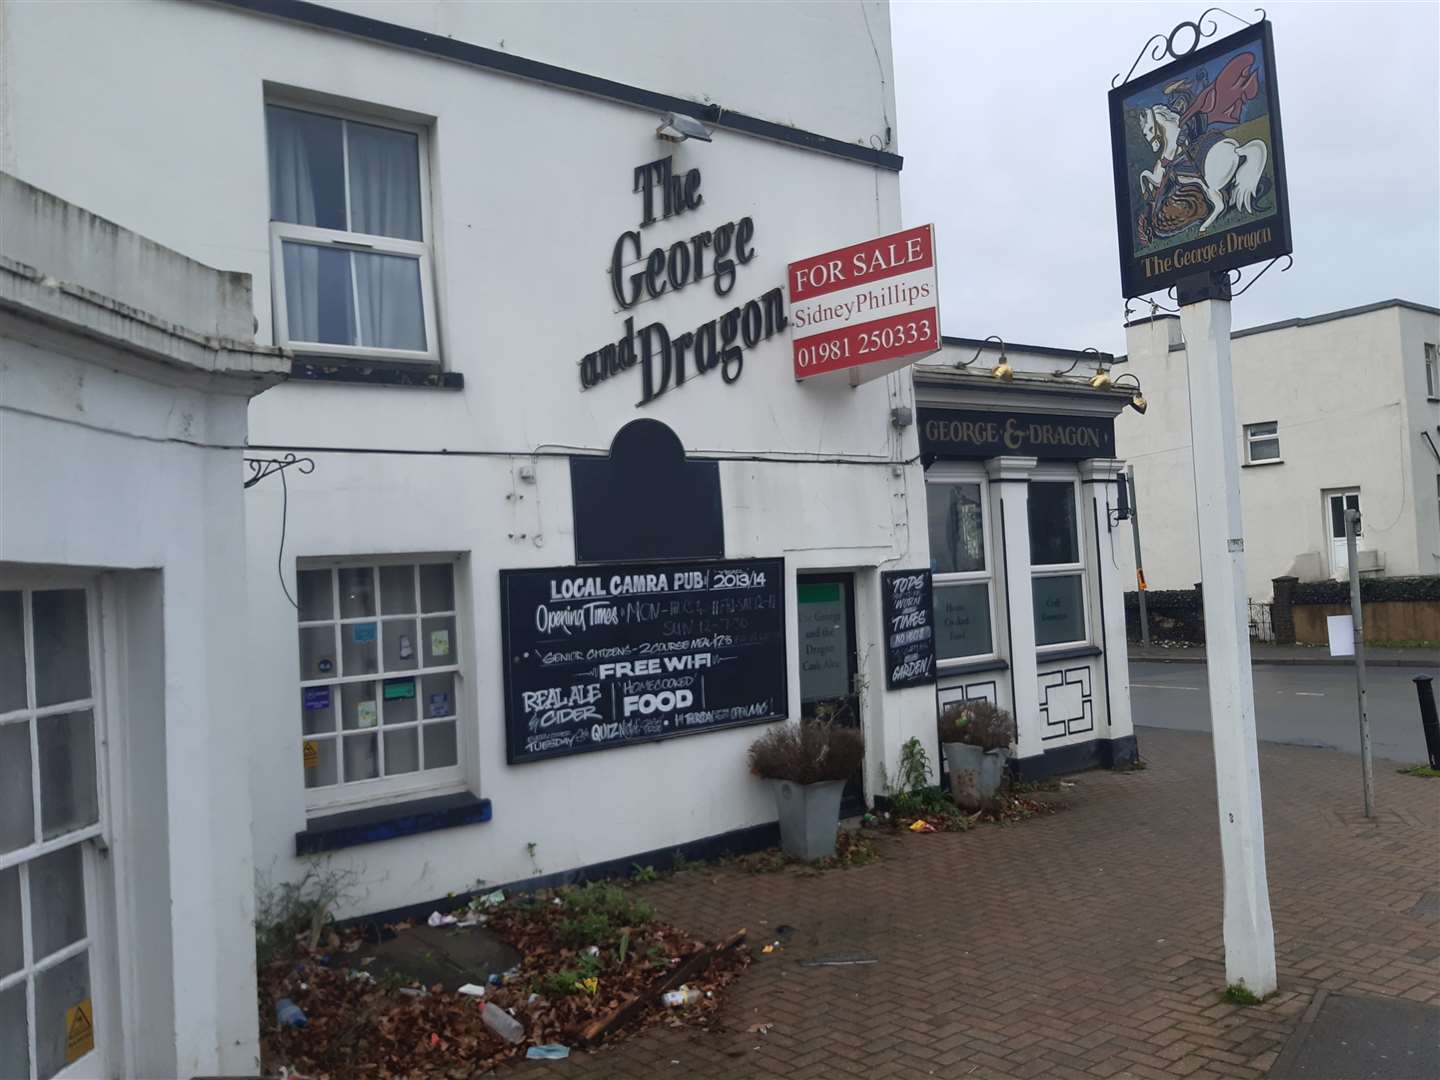 The George and Dragon Pub in Swanscombe is back up for sale